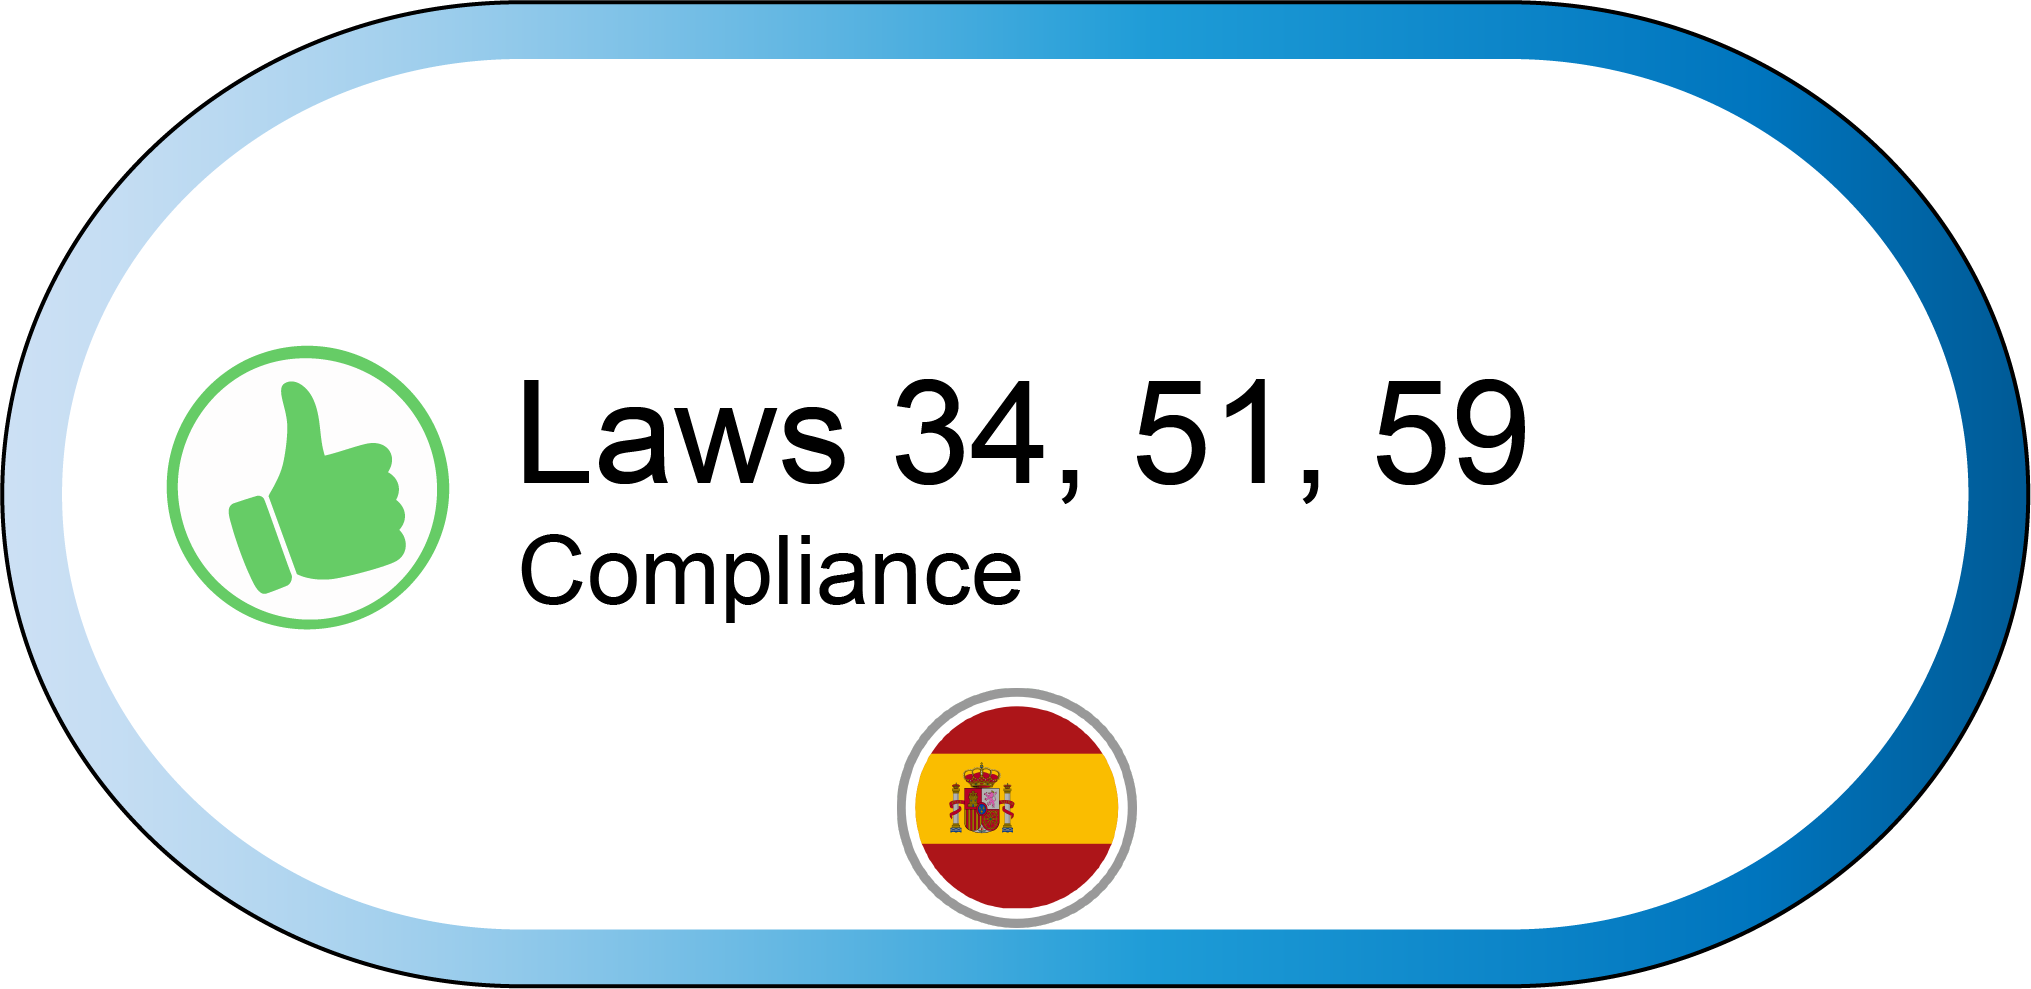 laws 34, 51, and 59 compliance icon